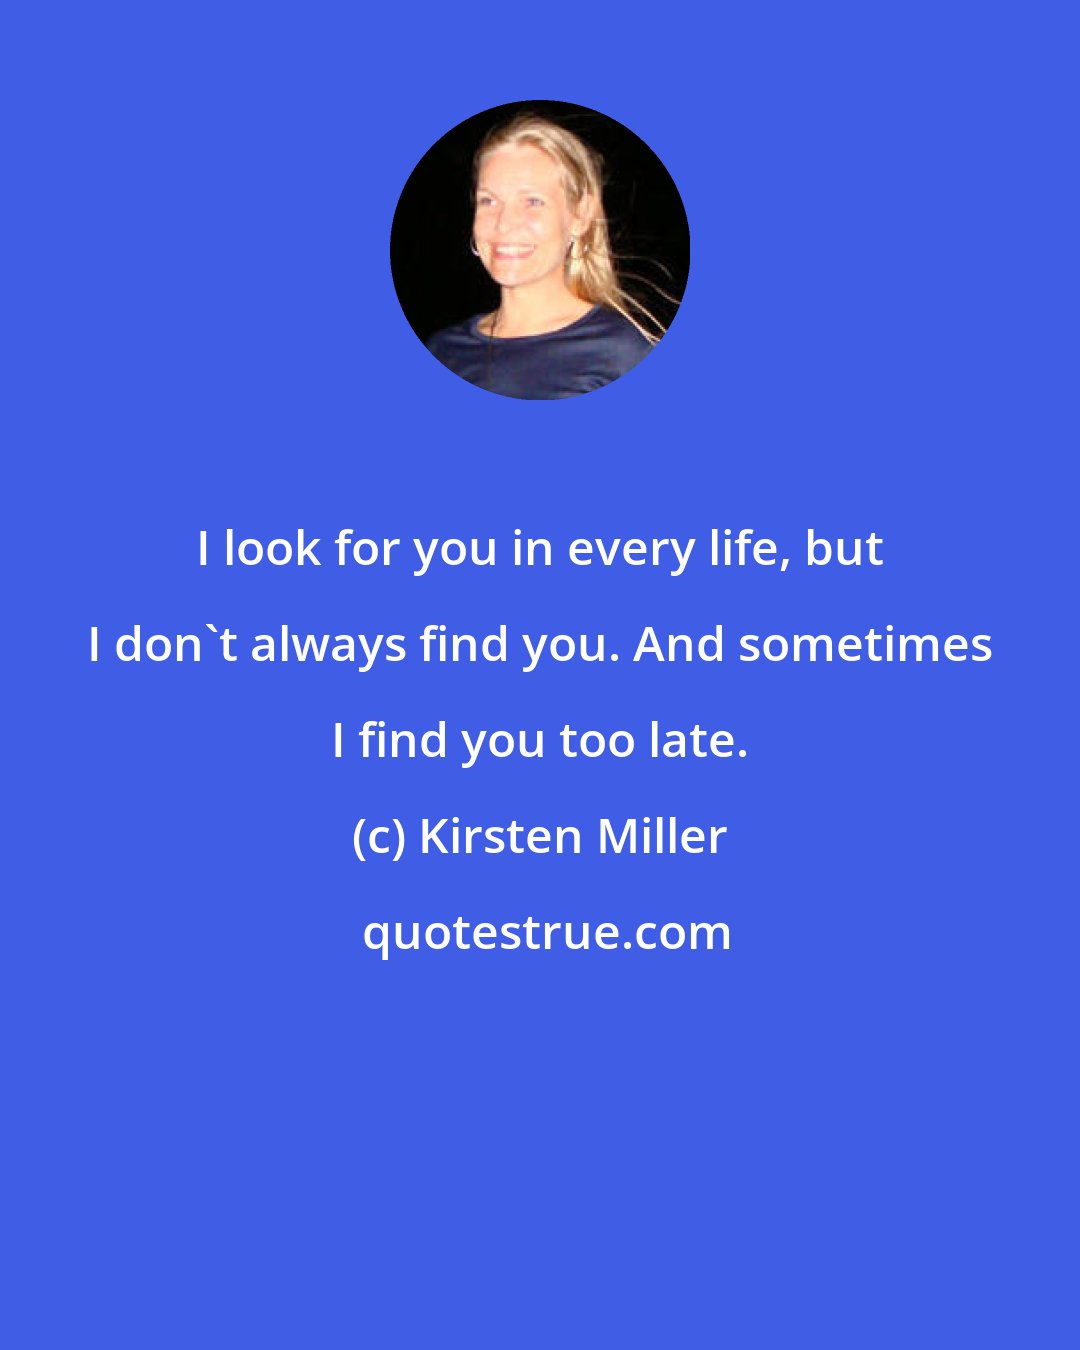 Kirsten Miller: I look for you in every life, but I don't always find you. And sometimes I find you too late.